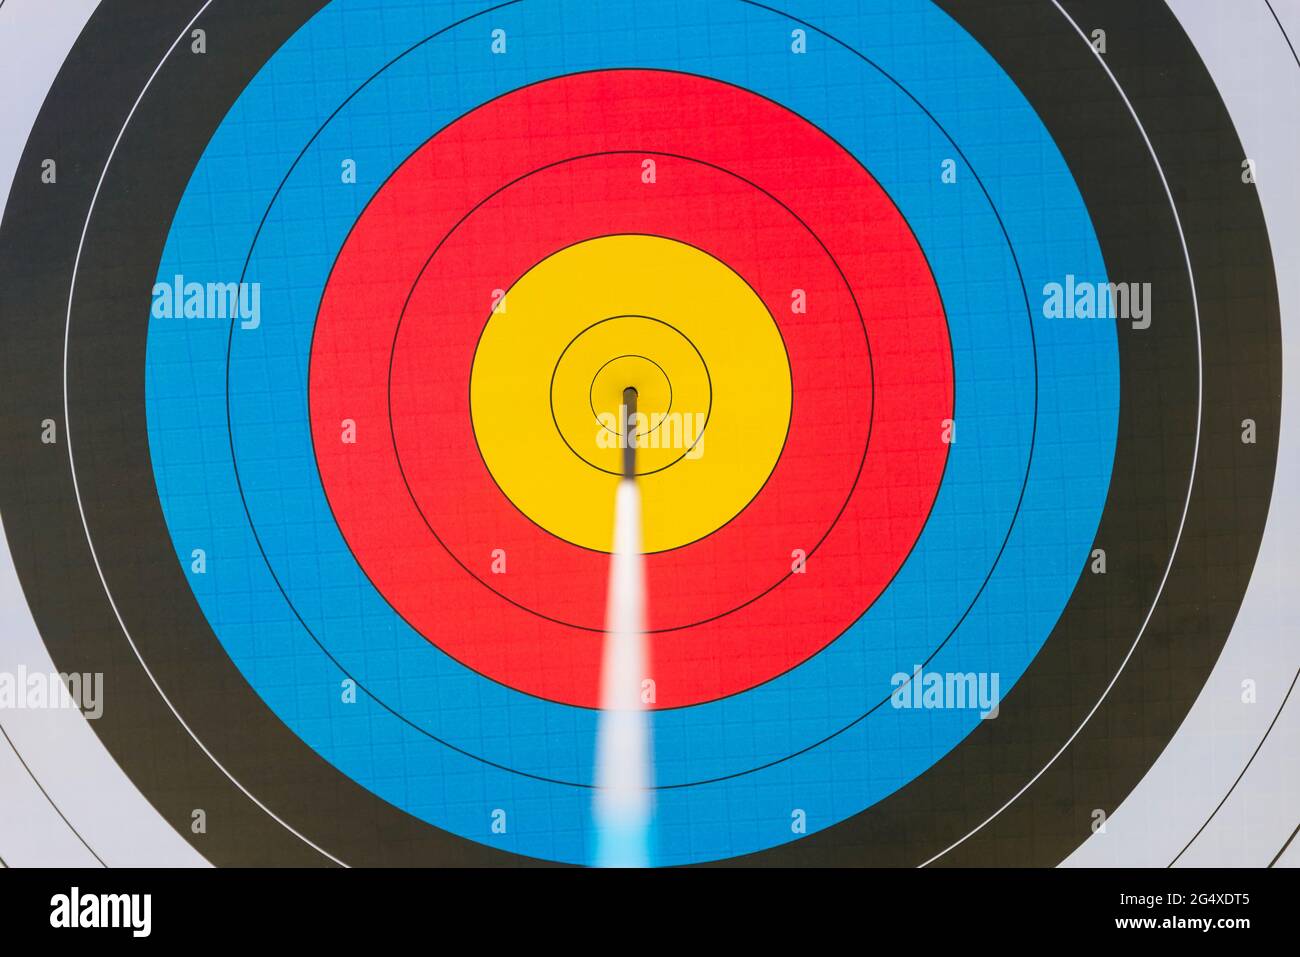 What Color is The Bull On an Archery Target?  